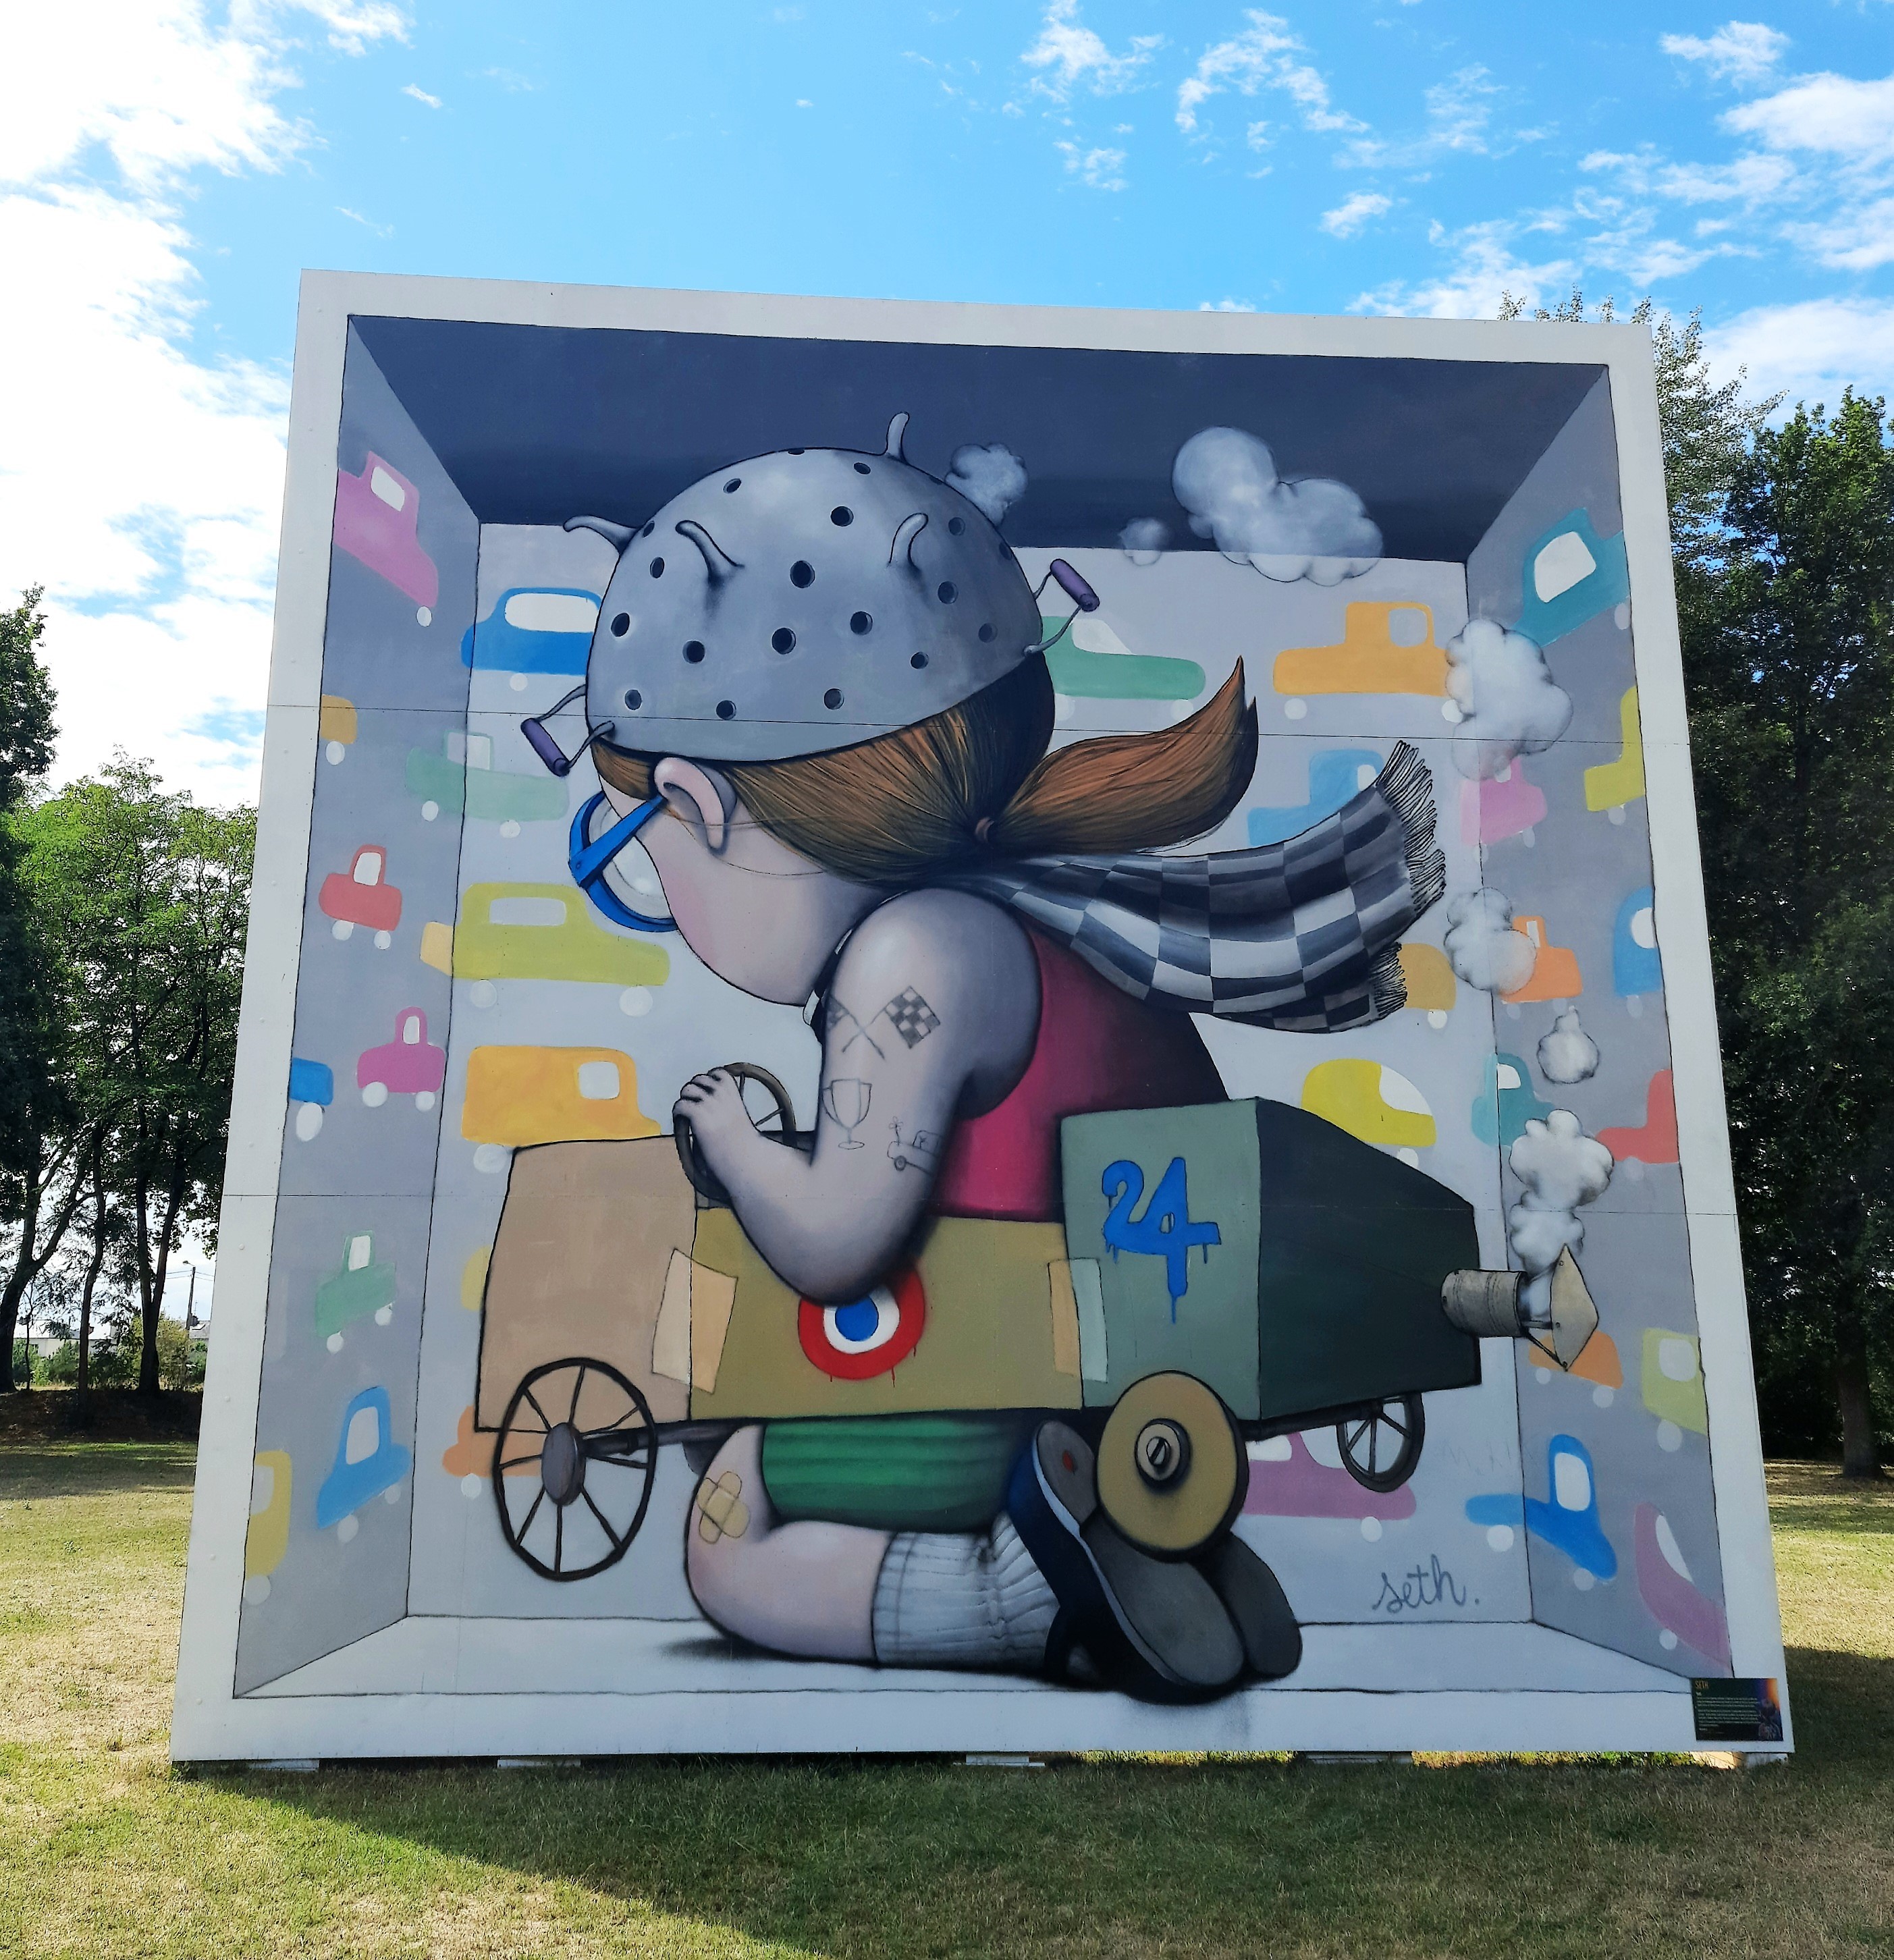 Graffiti 6953  by the artist Seth captured by Mephisroth in Le Mans France